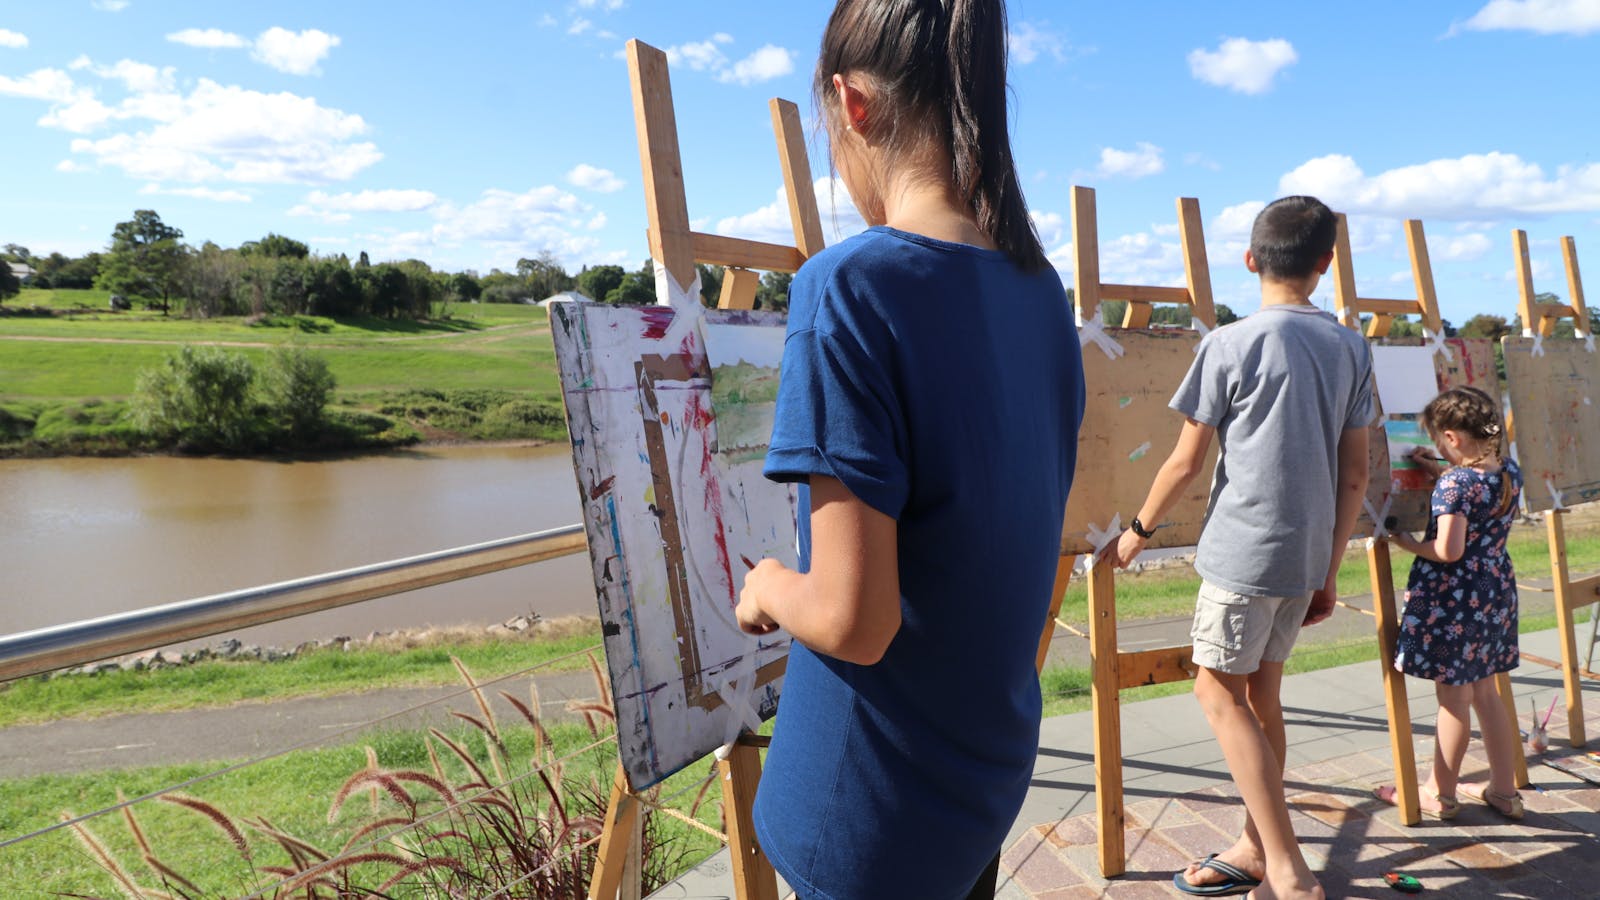 Free Art by The River